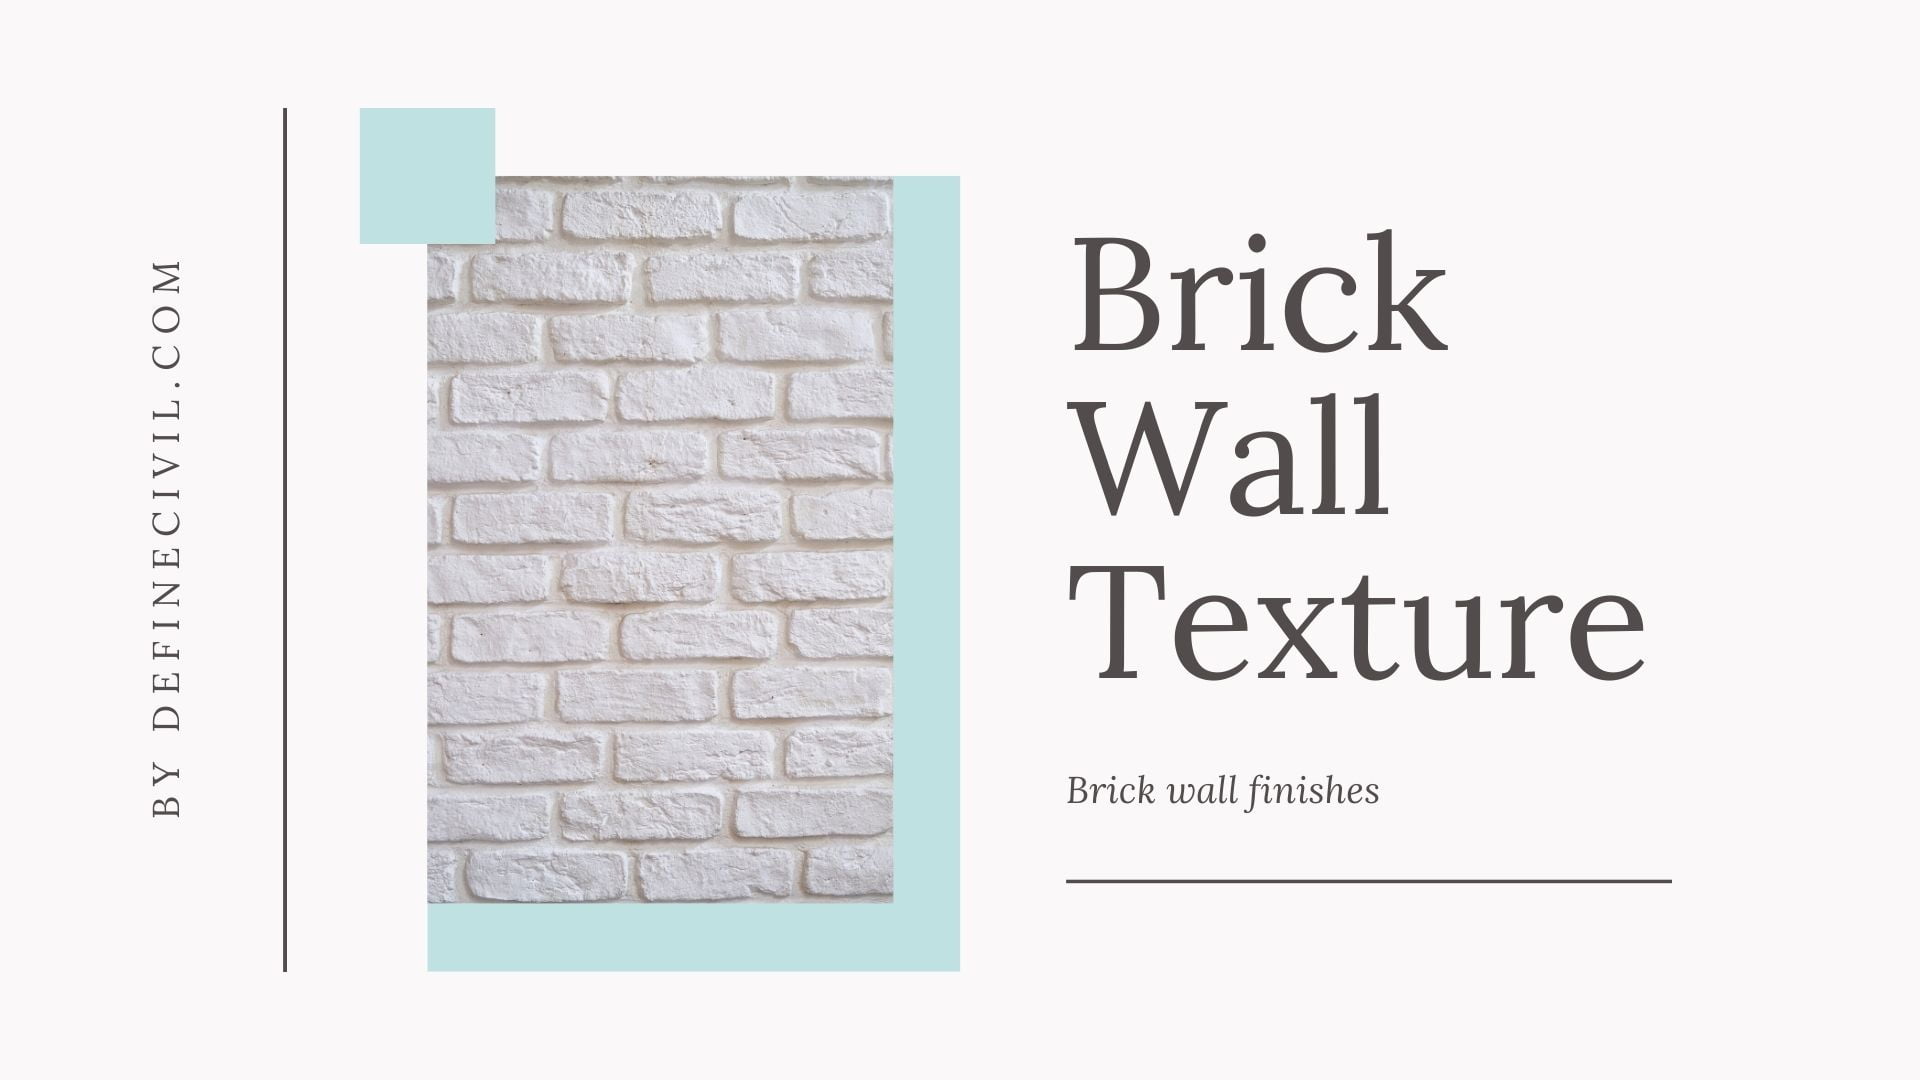 Types of Brick finishes - Brick Wall Texture